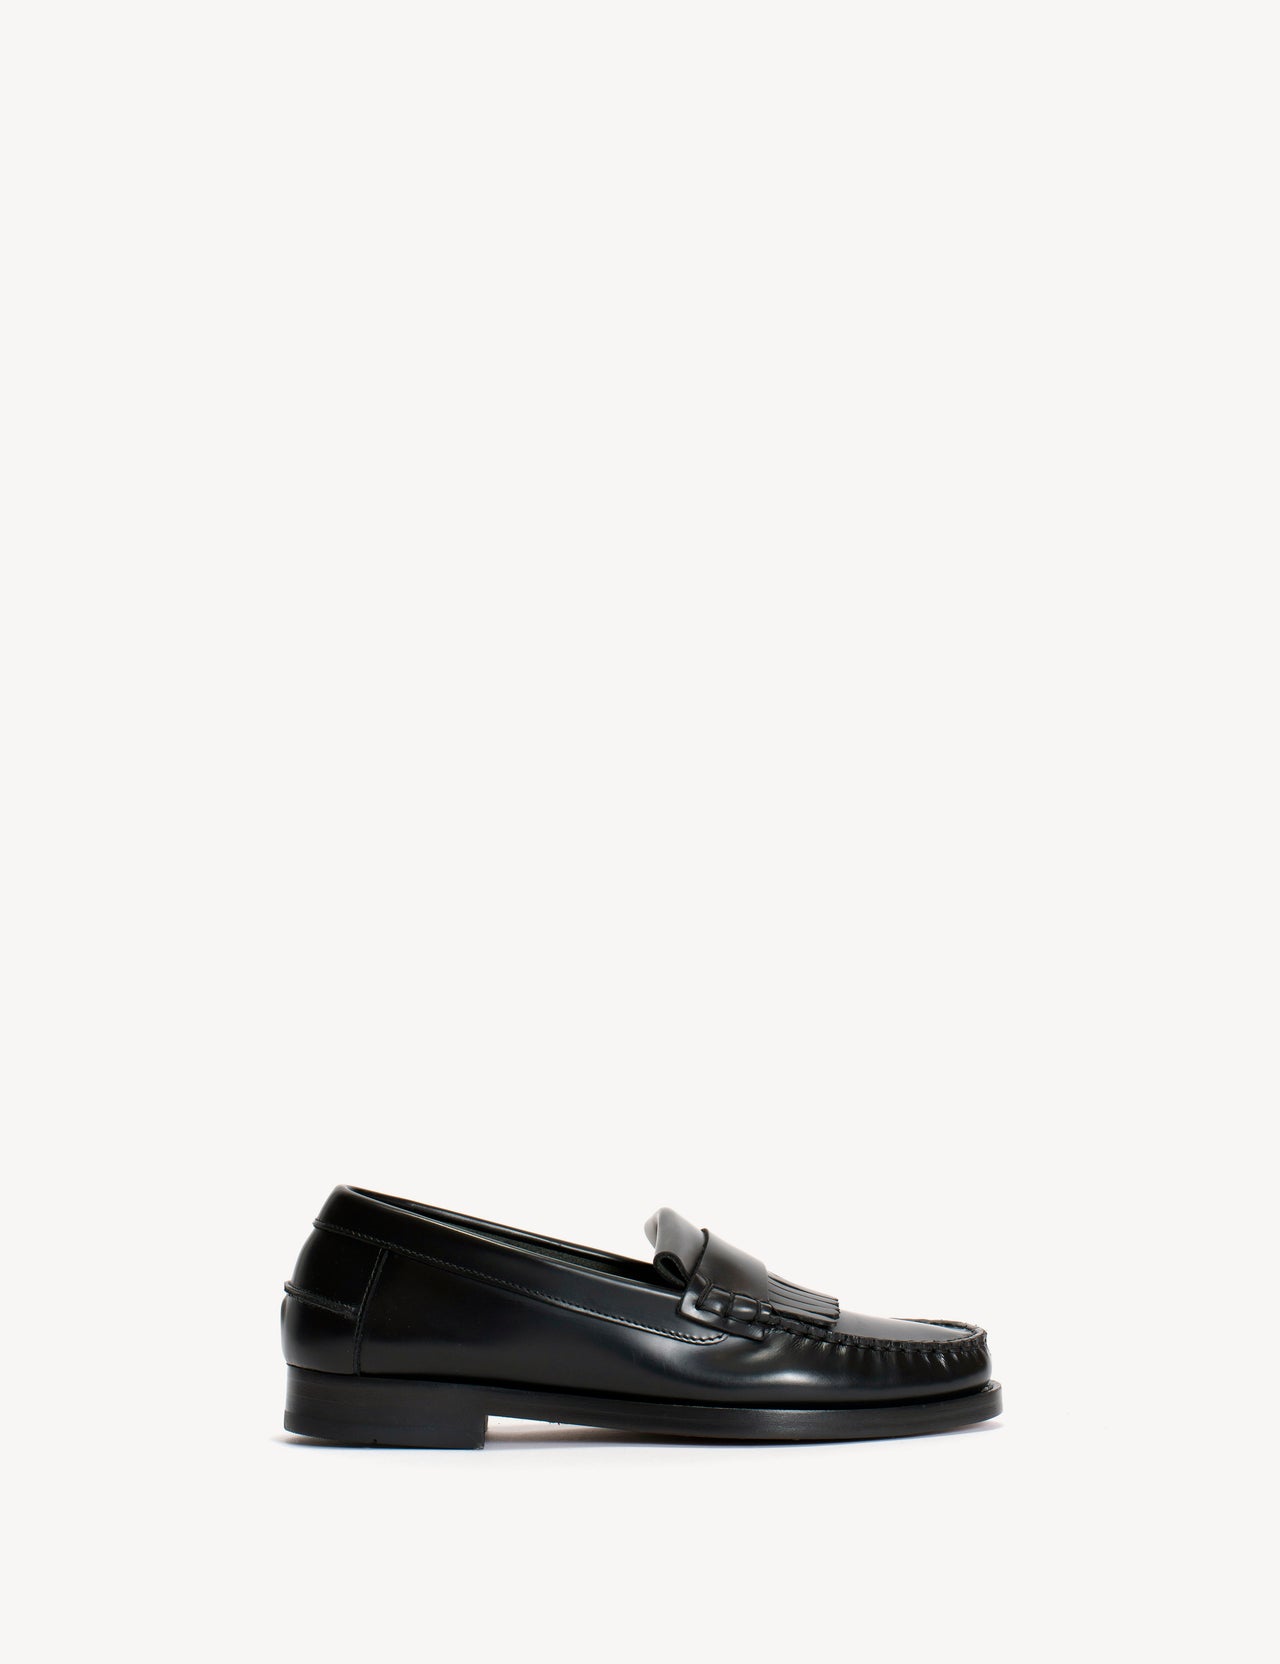 Moccasin Loafer With Fringes In Black Polido Leather